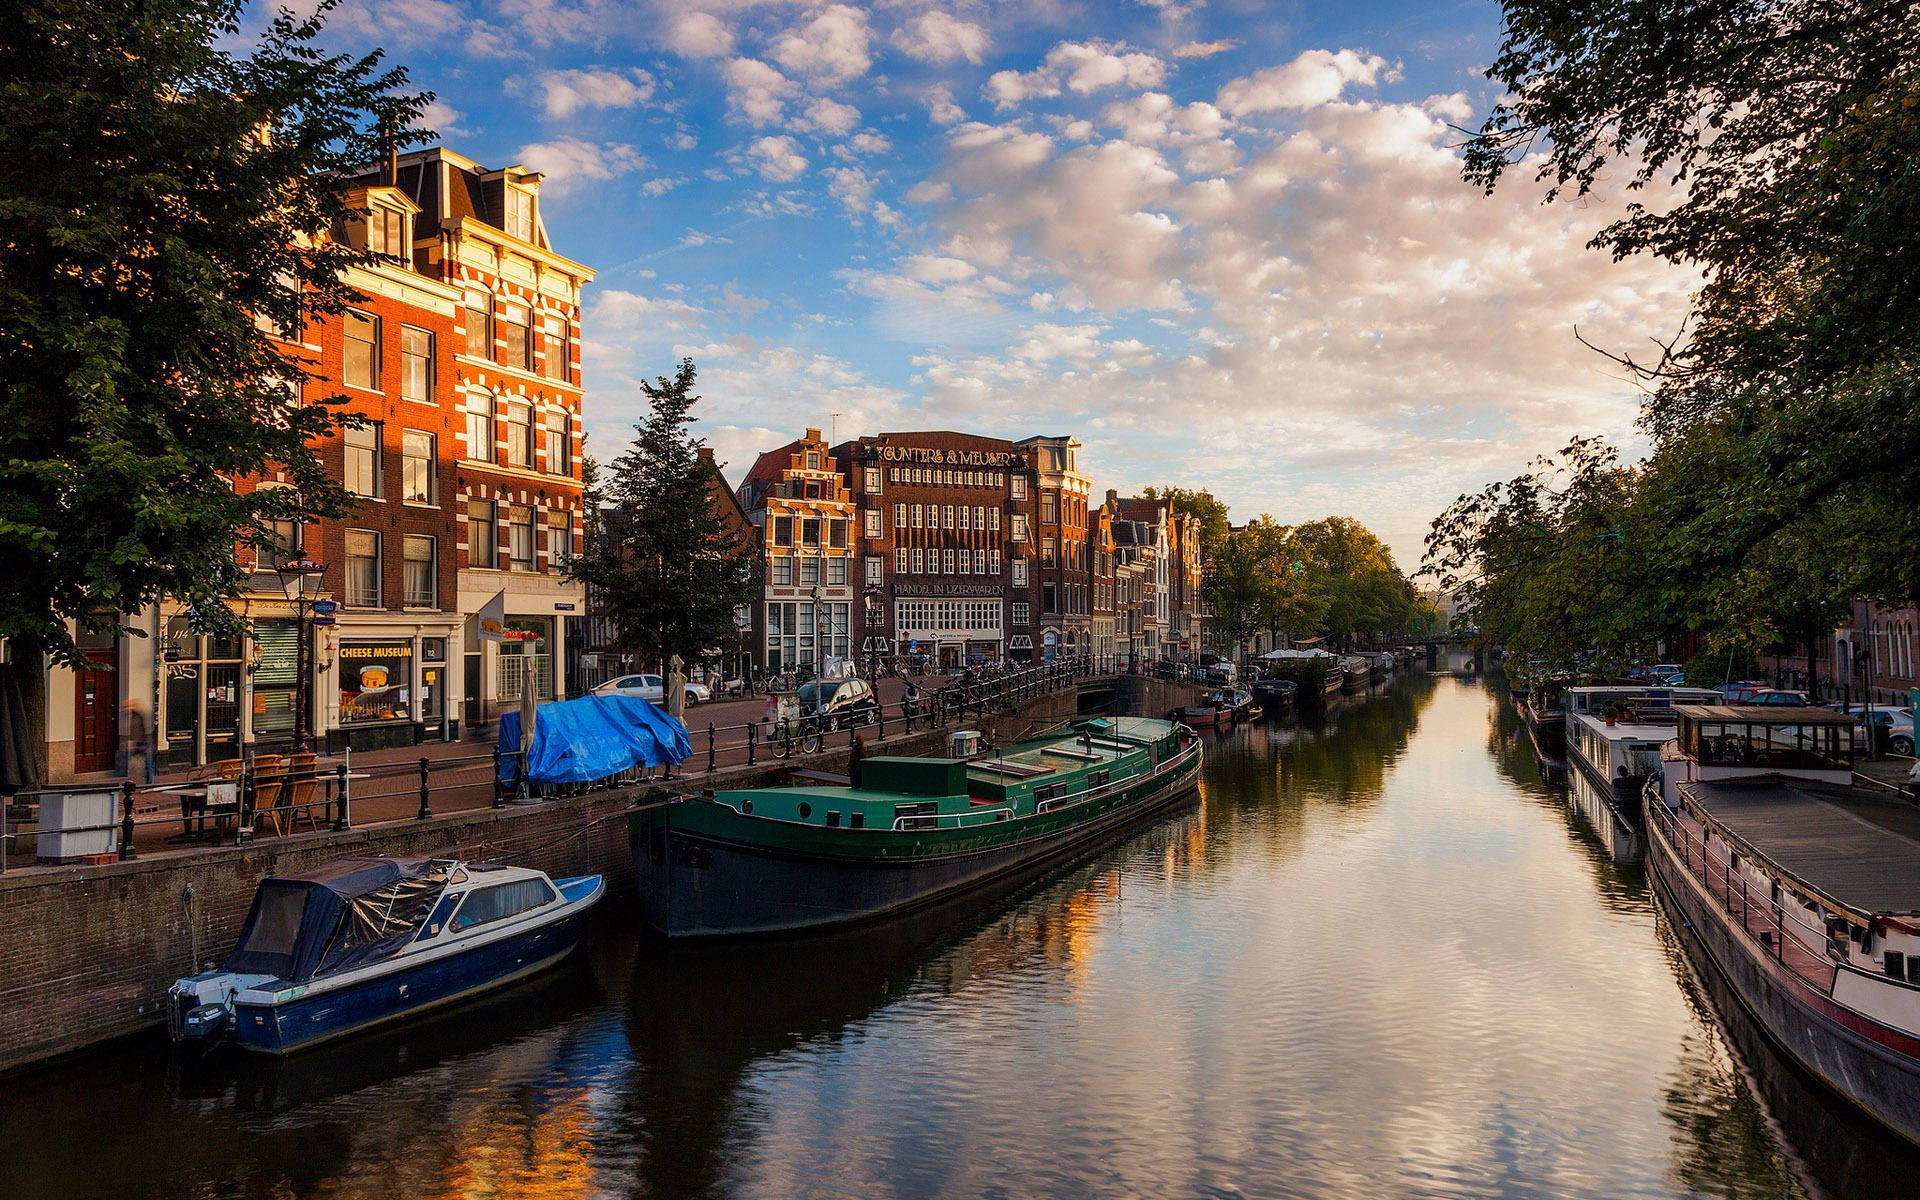 Europe's Long Narrow River Amsterdam Picture